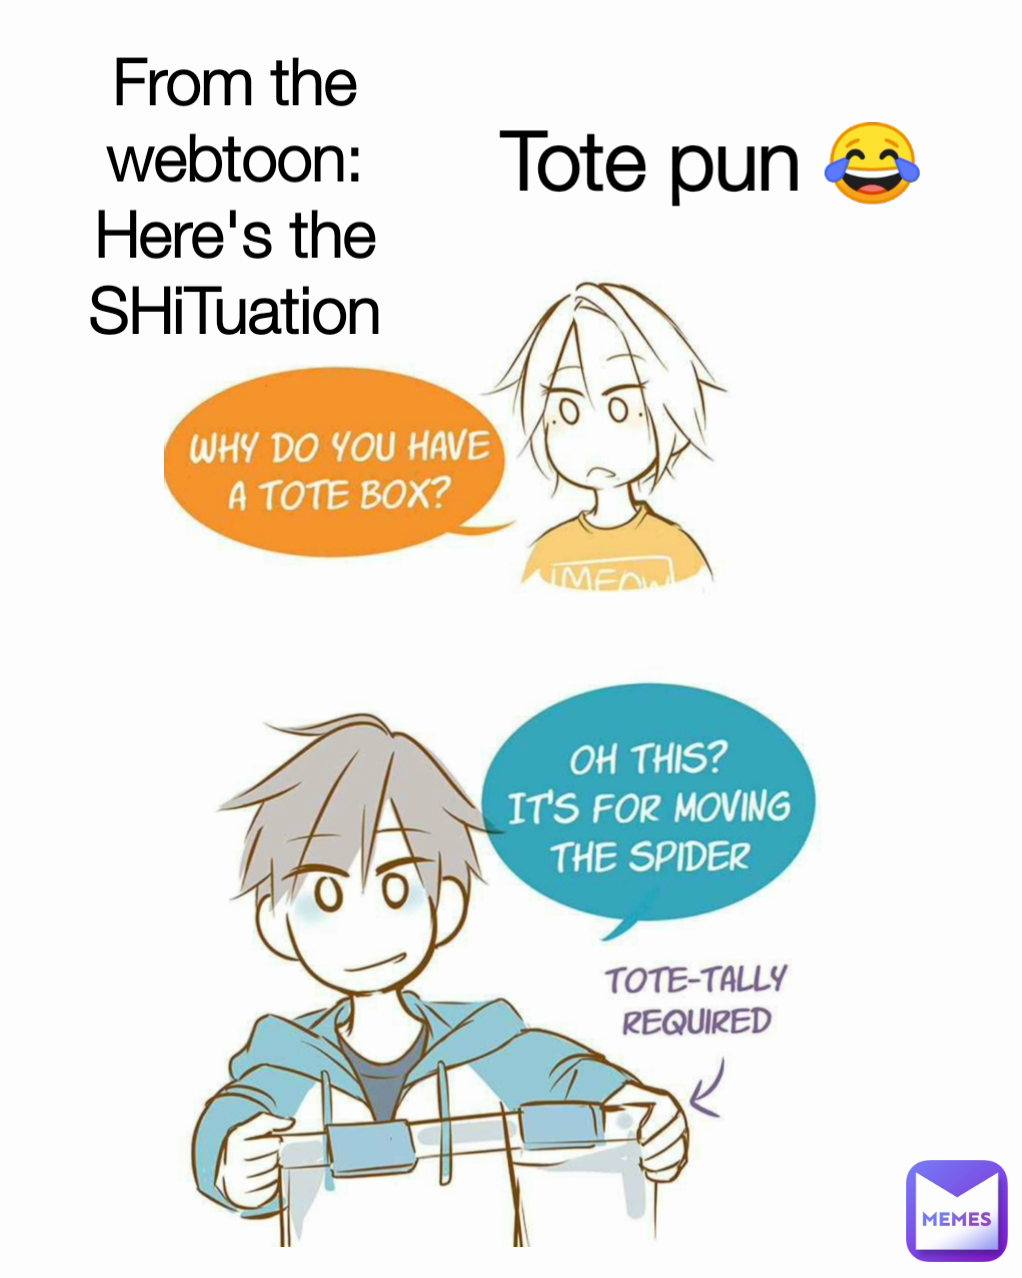 Tote pun 😂 From the webtoon:
Here's the SHiTuation